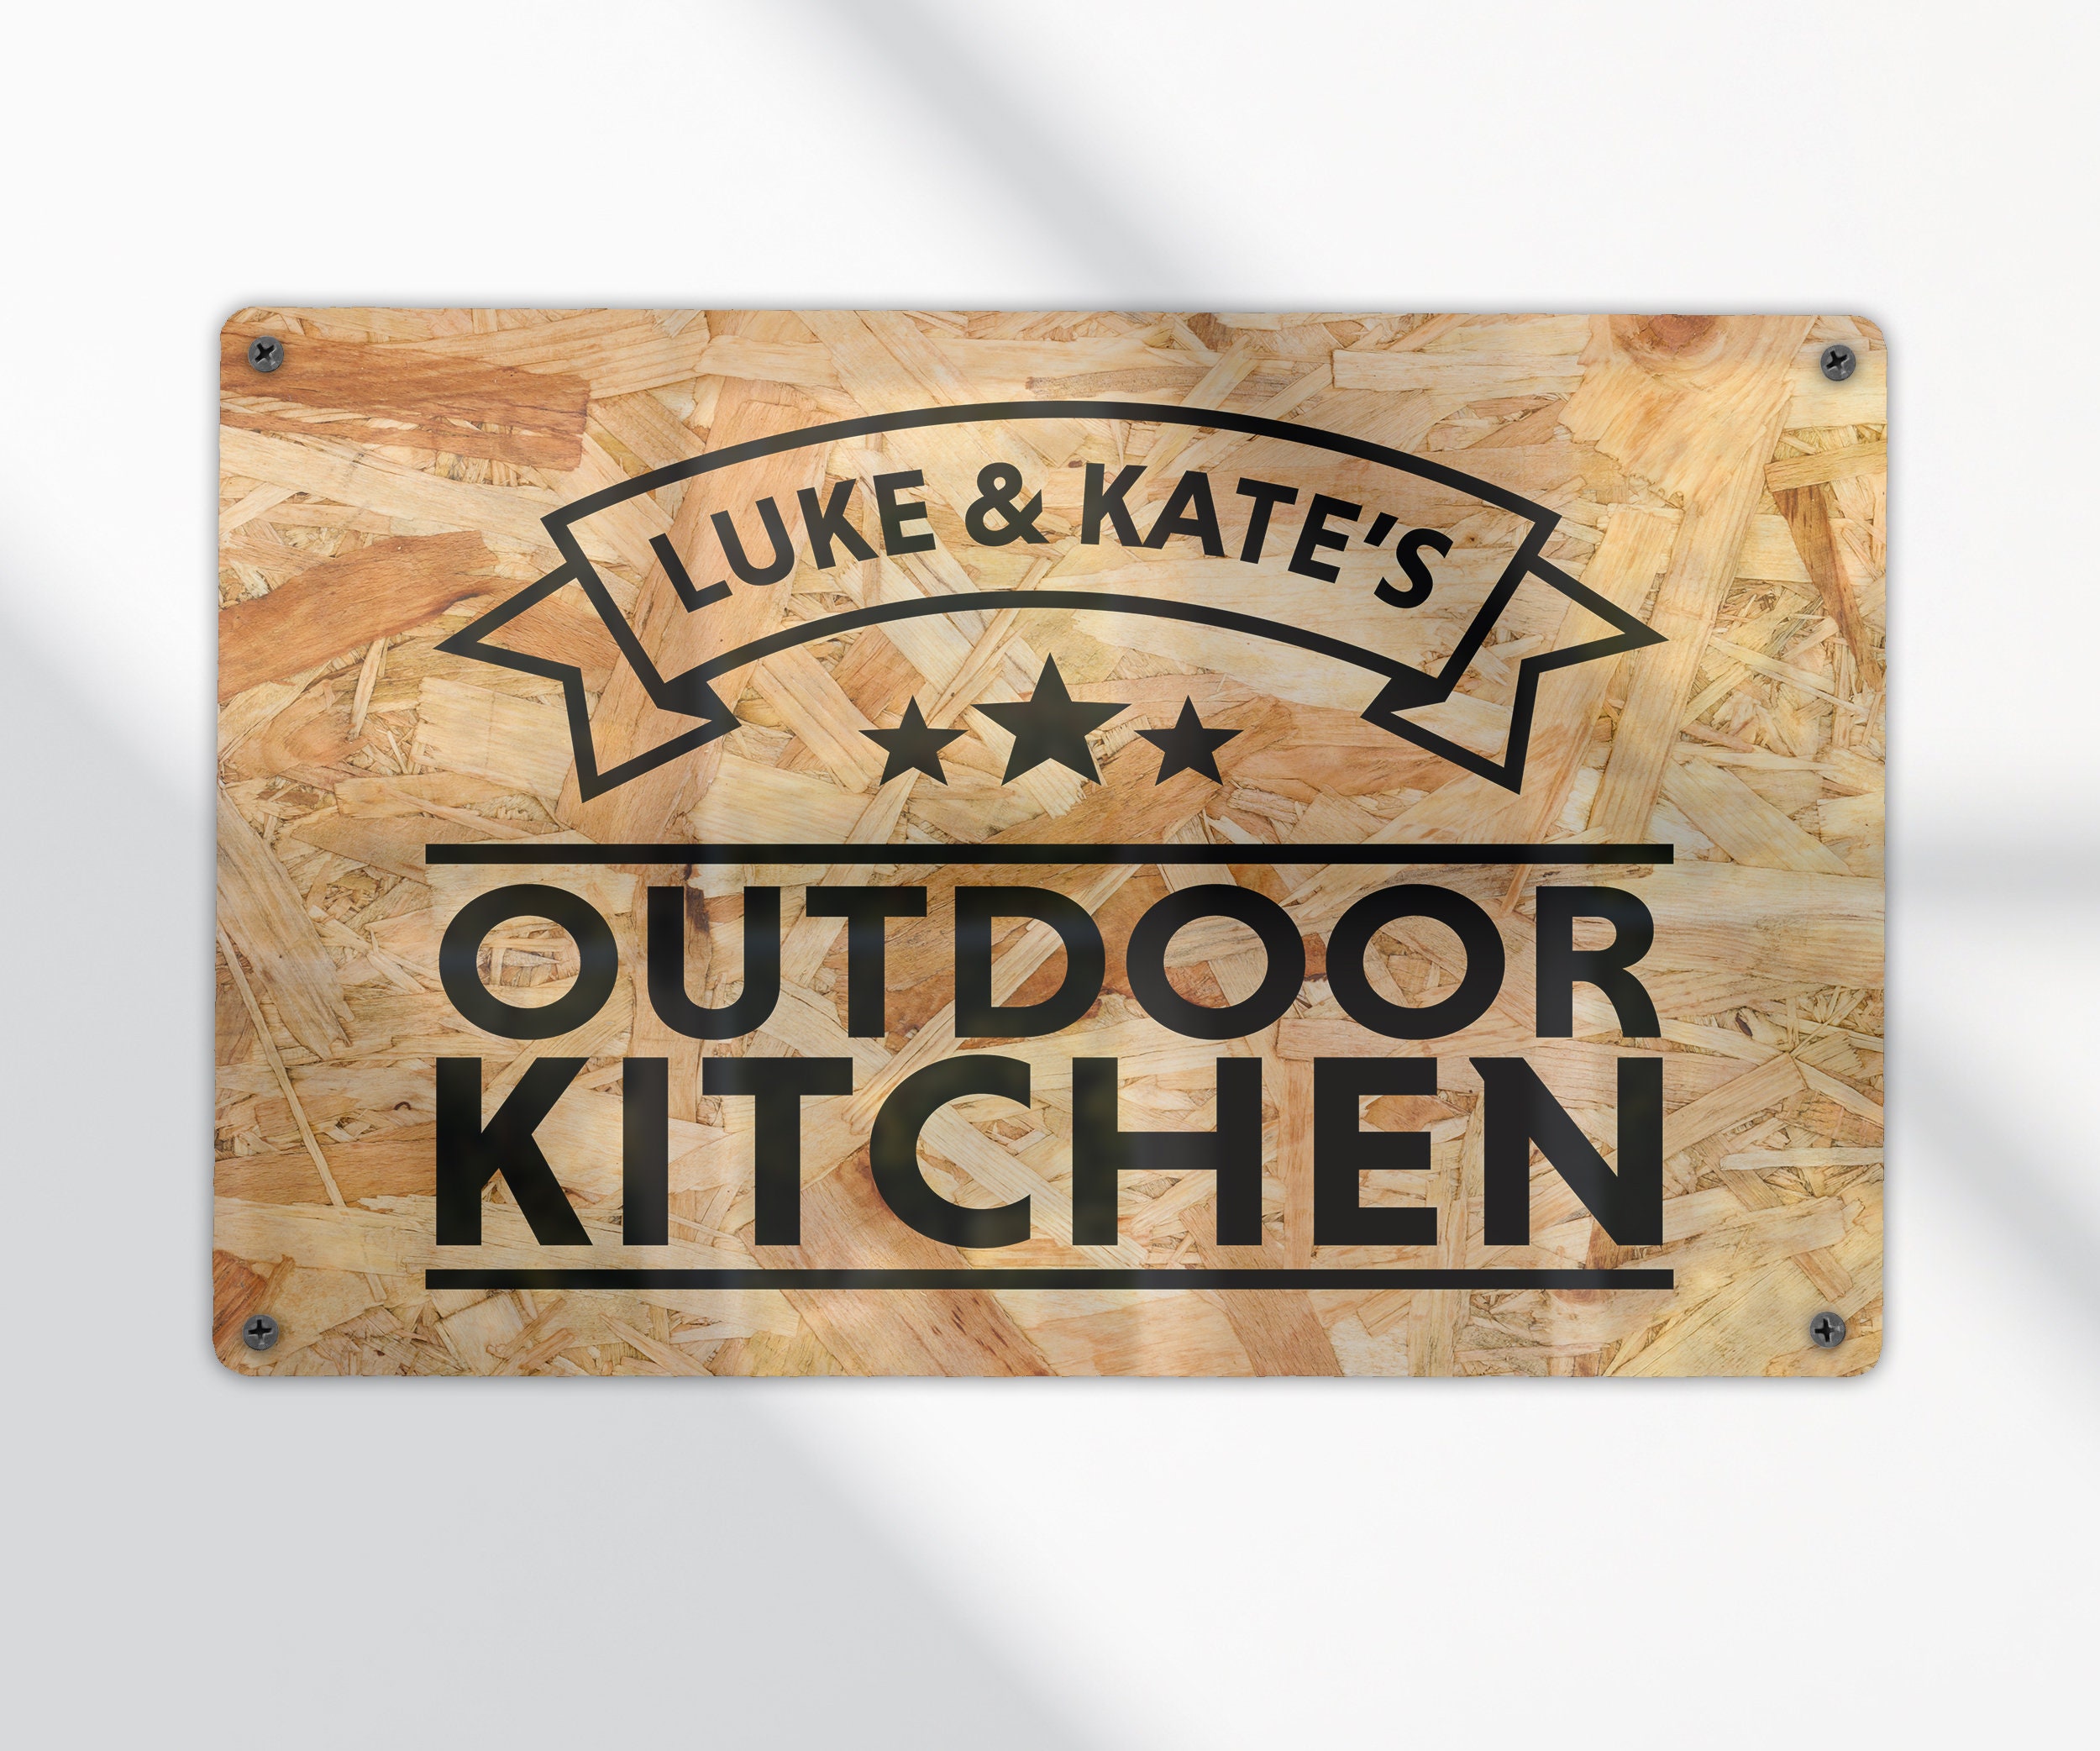 Outdoor Kitchen Buying Guide  KickAssGrills Learning Center